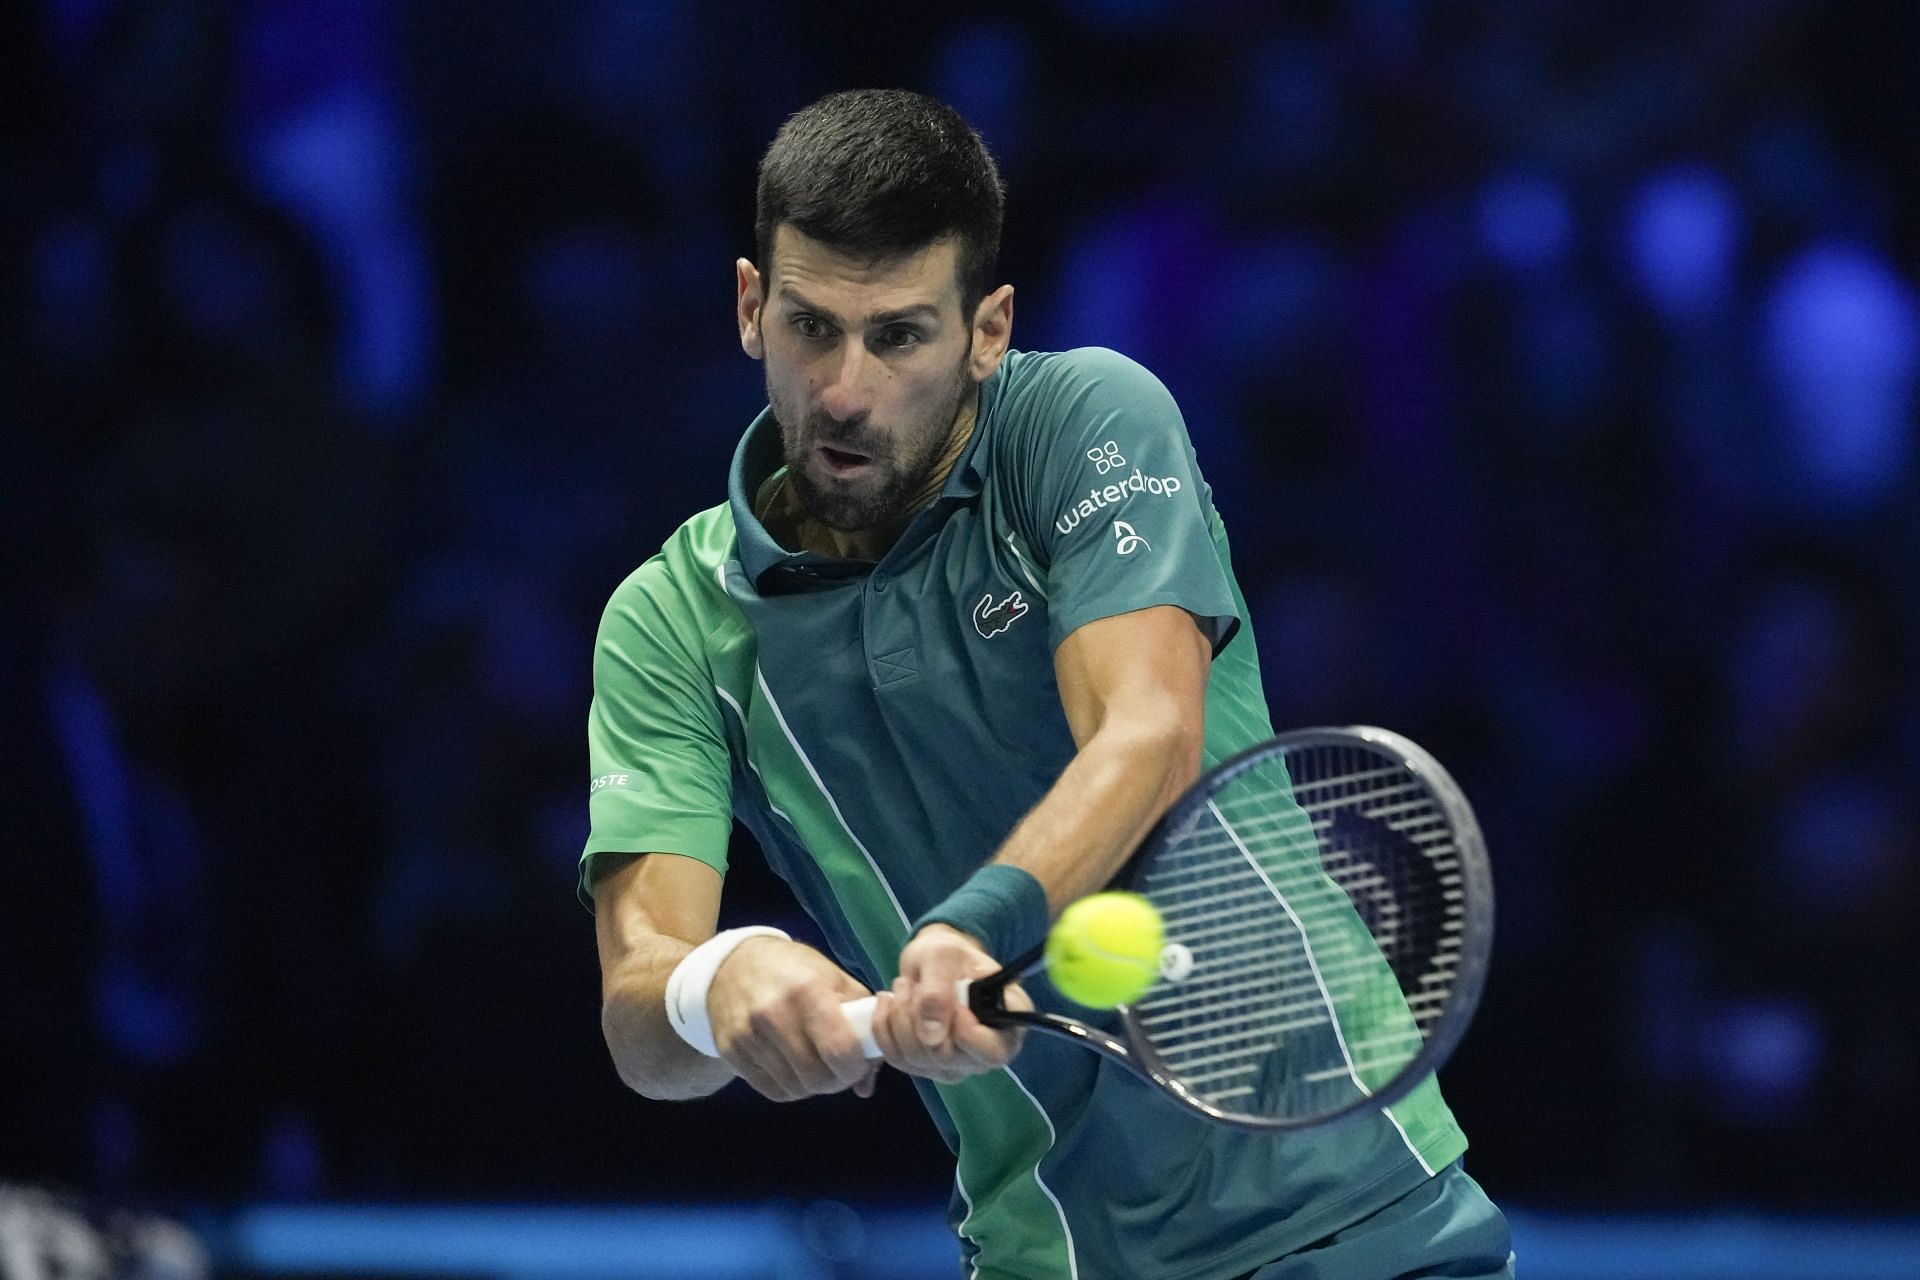 The World No. 1 in action at the ATP Finals